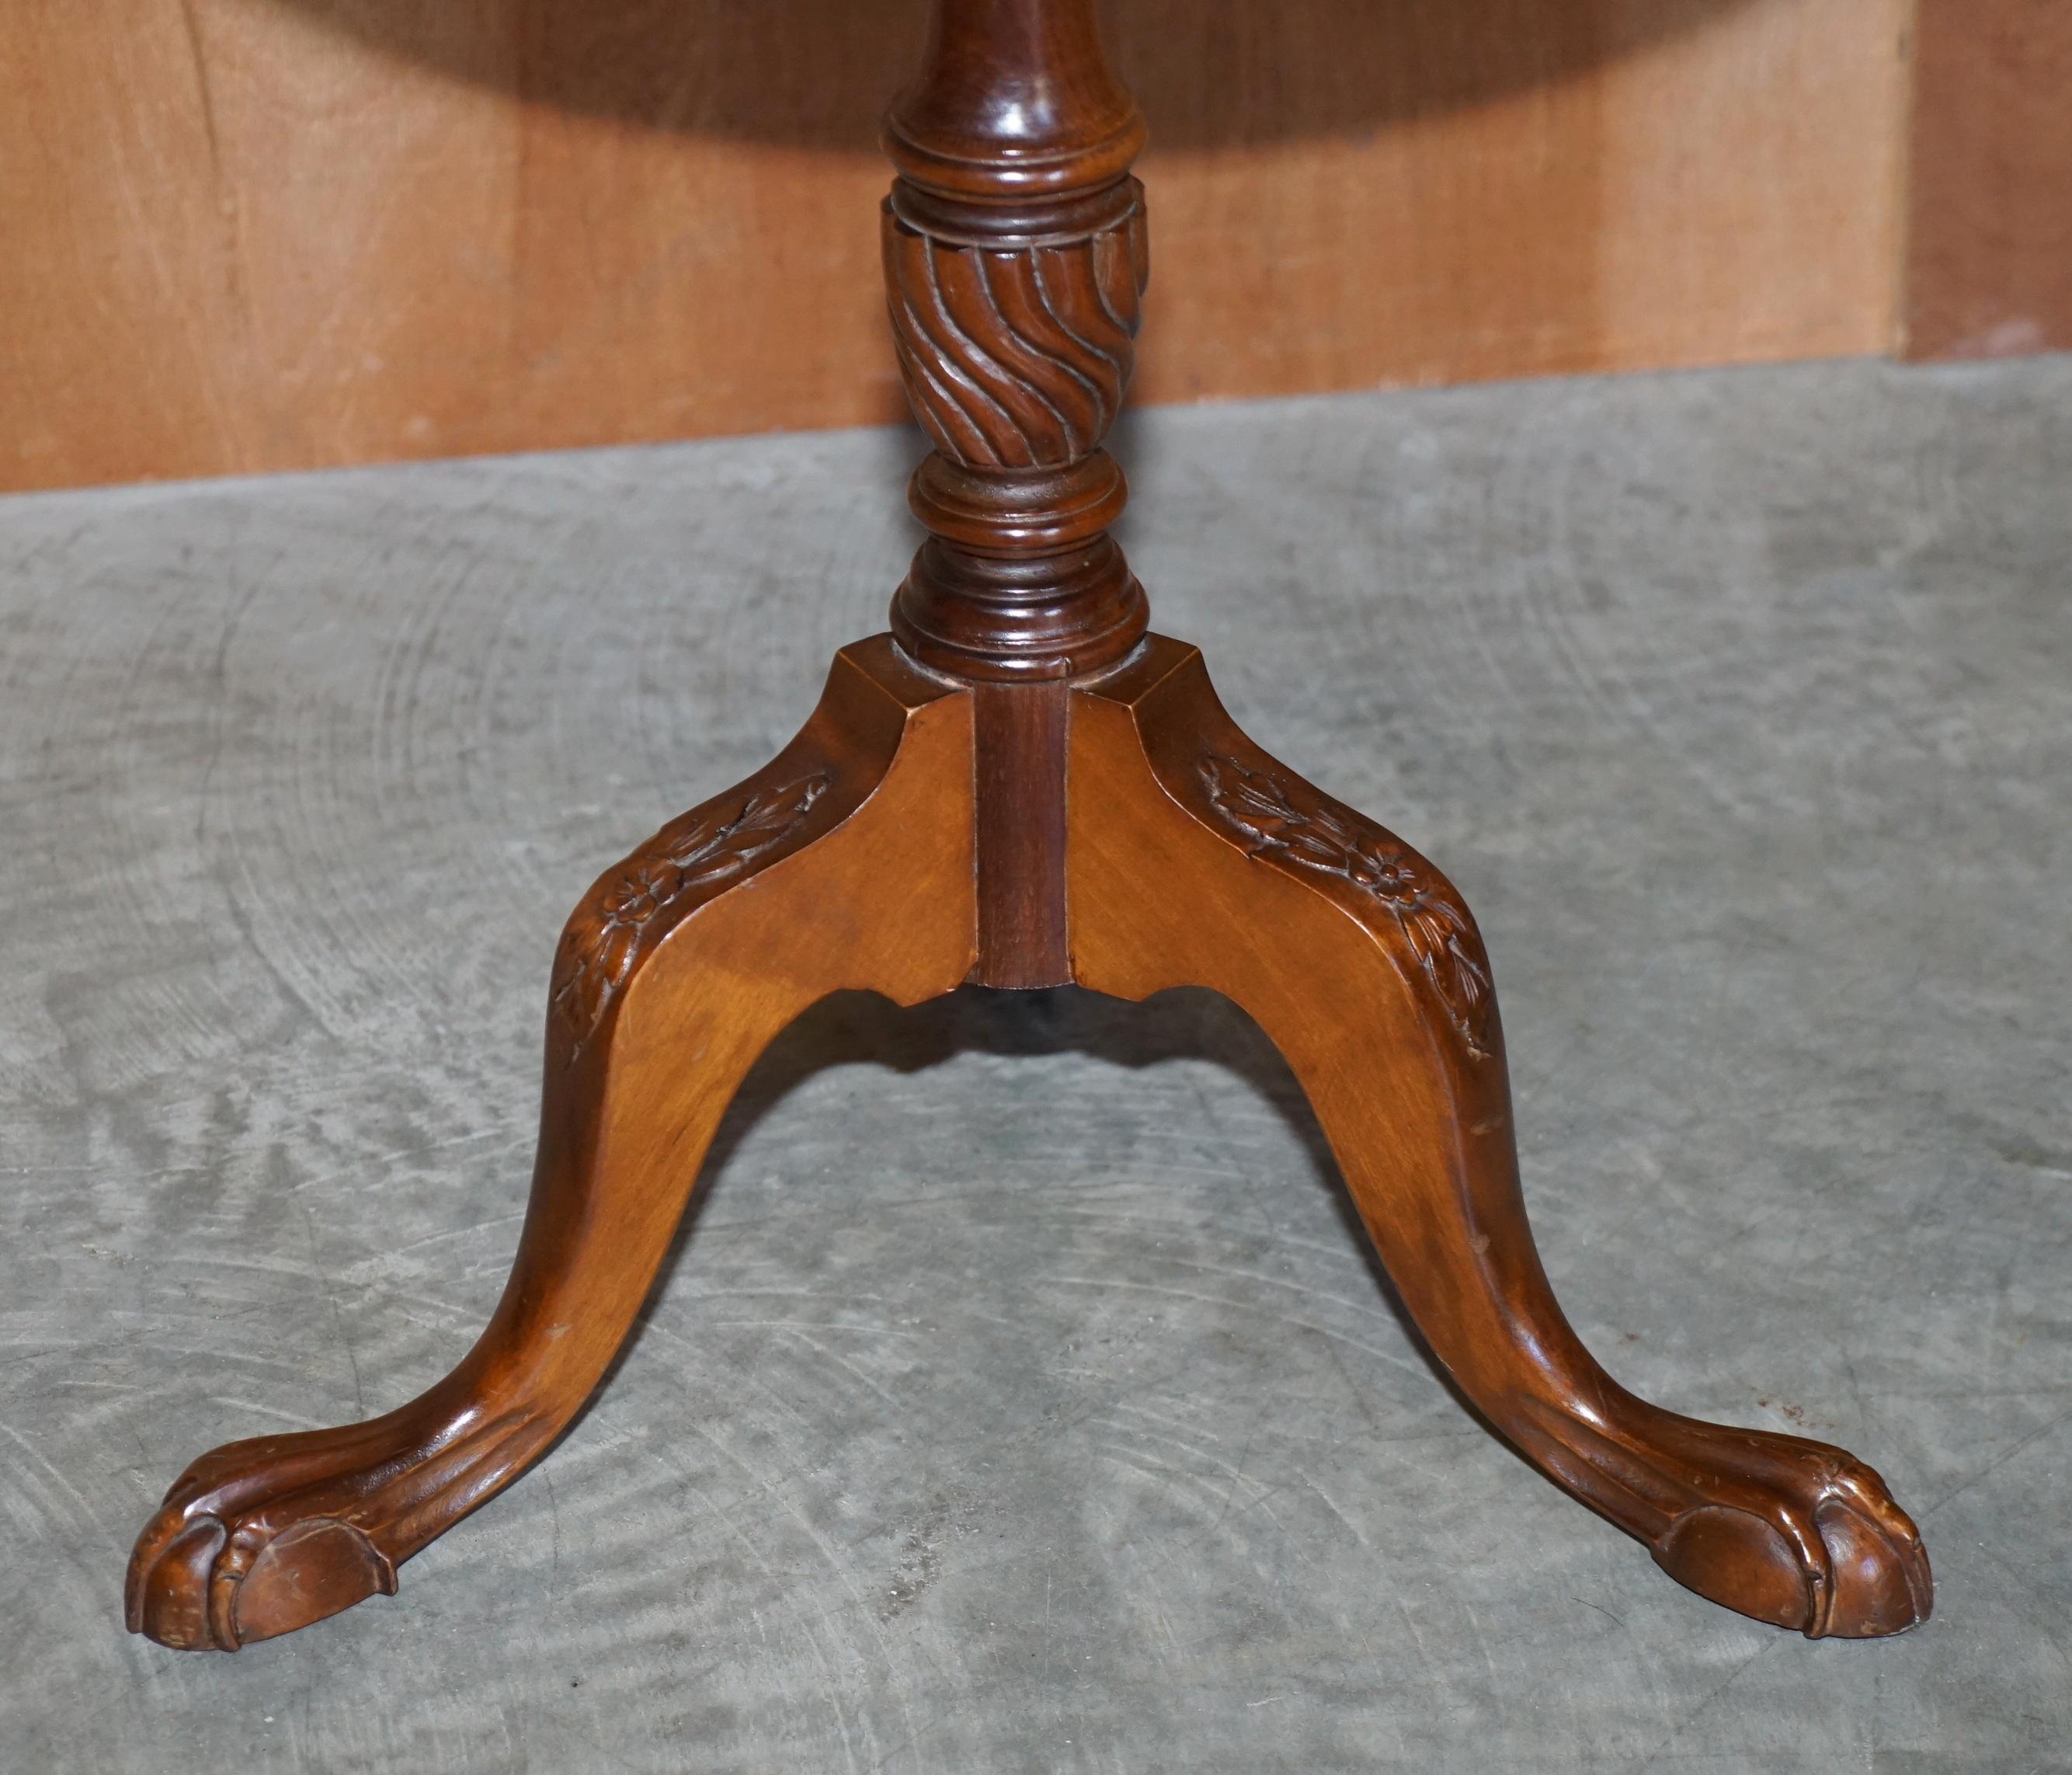 We are delighted to offer this very well made and decorative Bevan Funnell lamp table in flamed mahogany with Regency style gallery rail 

Please note the delivery fee listed is just a guide, it covers within the M25 only for the UK and local